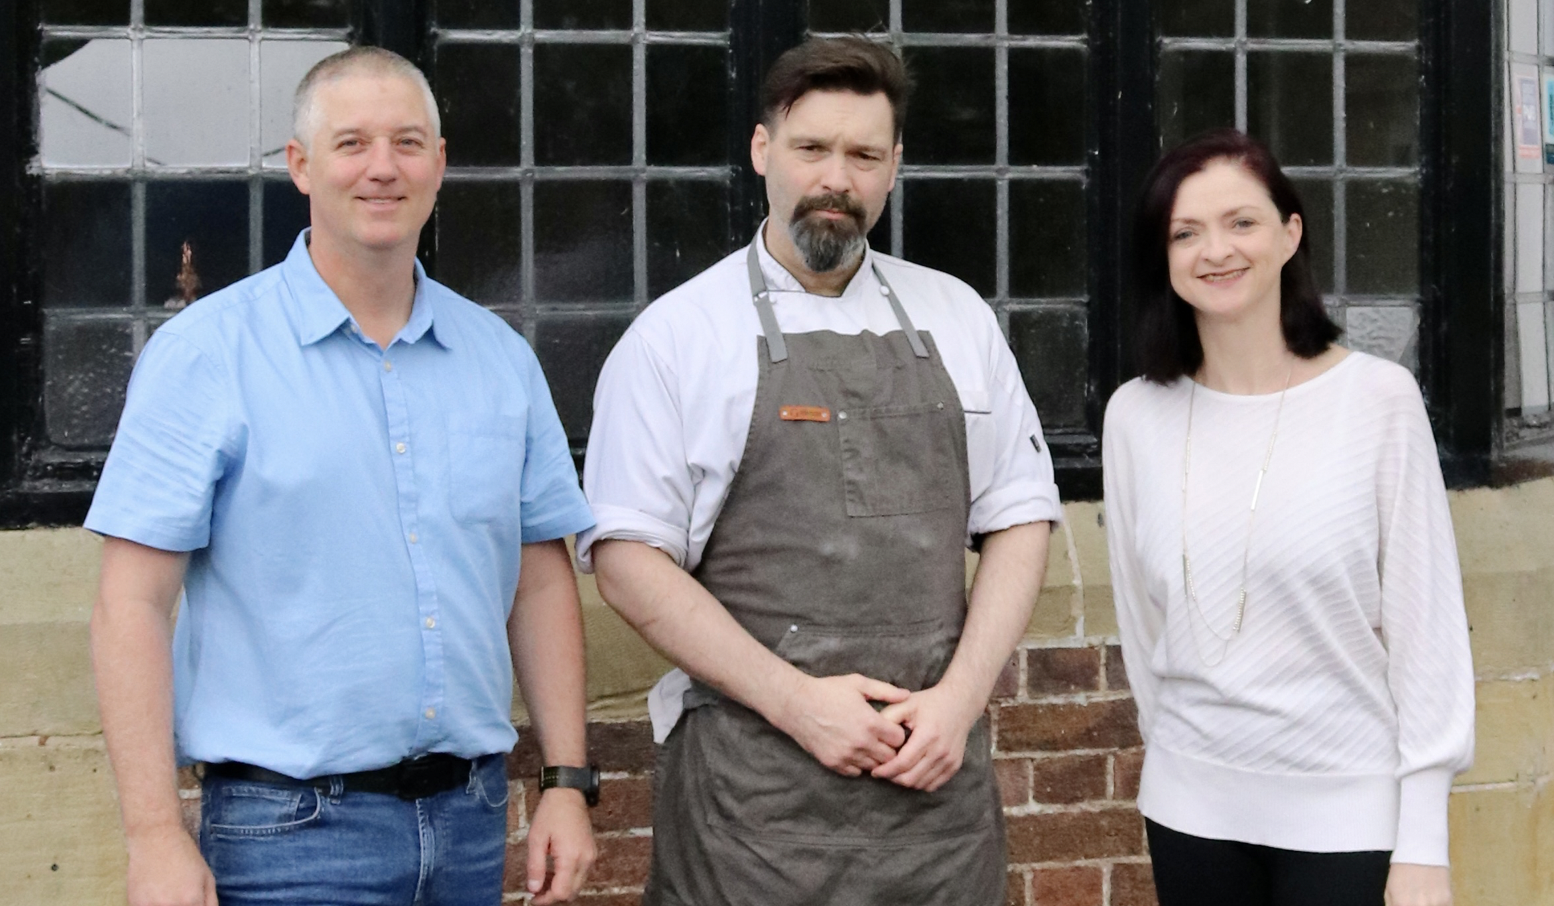 Aldwalk Arms hires one of Yorkshire's most talented chefs